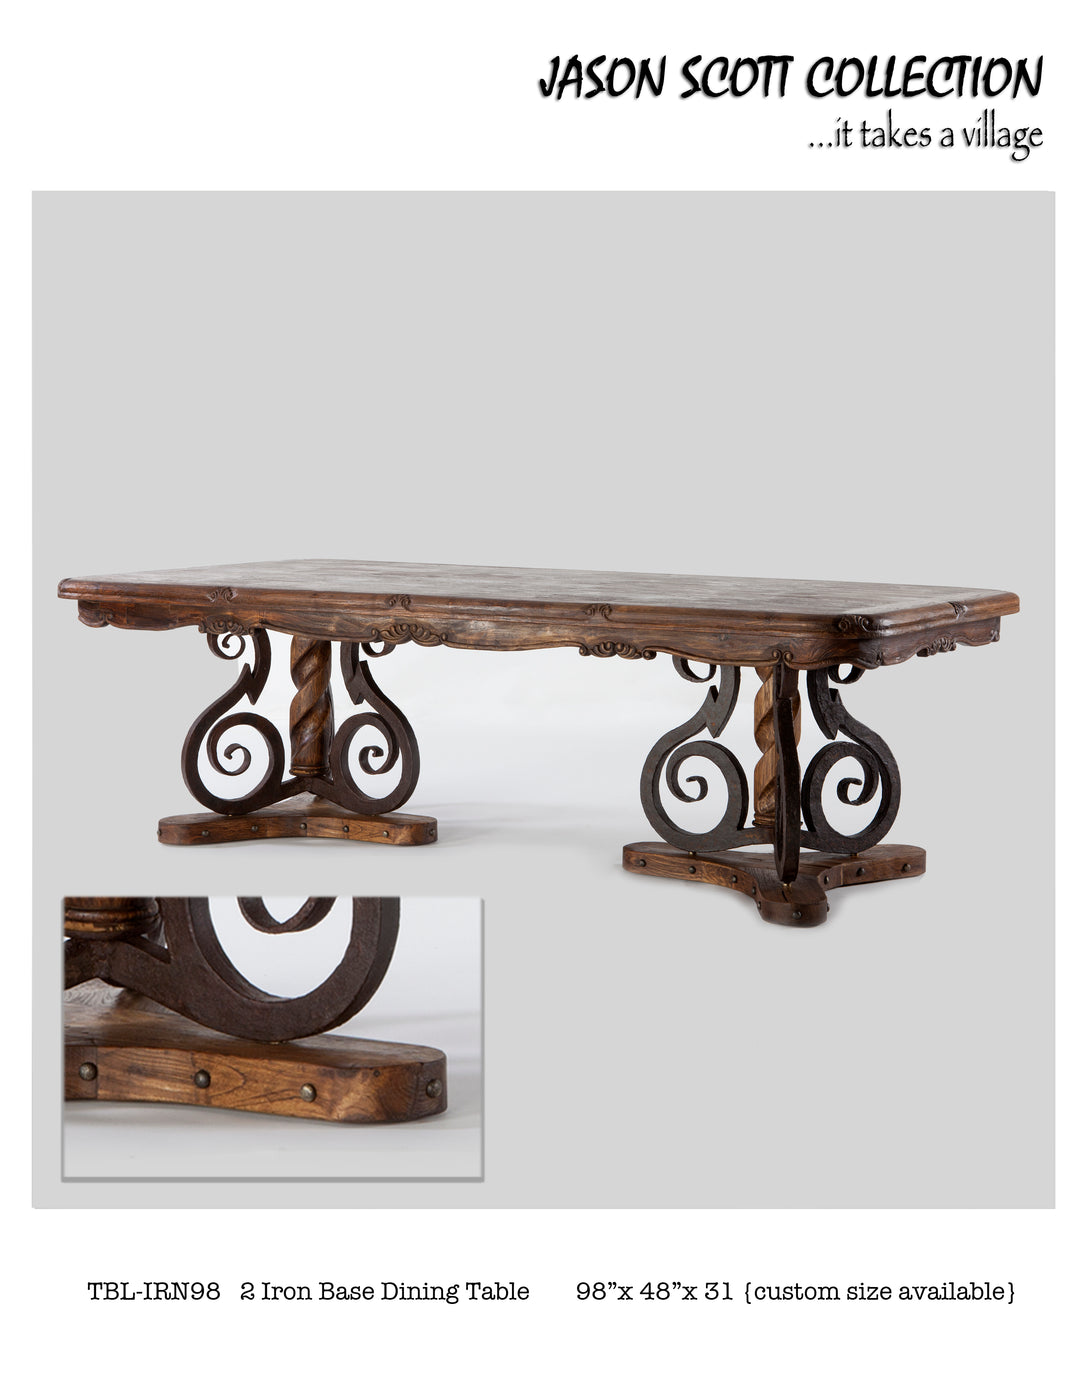 2 Iron Base Dining Table